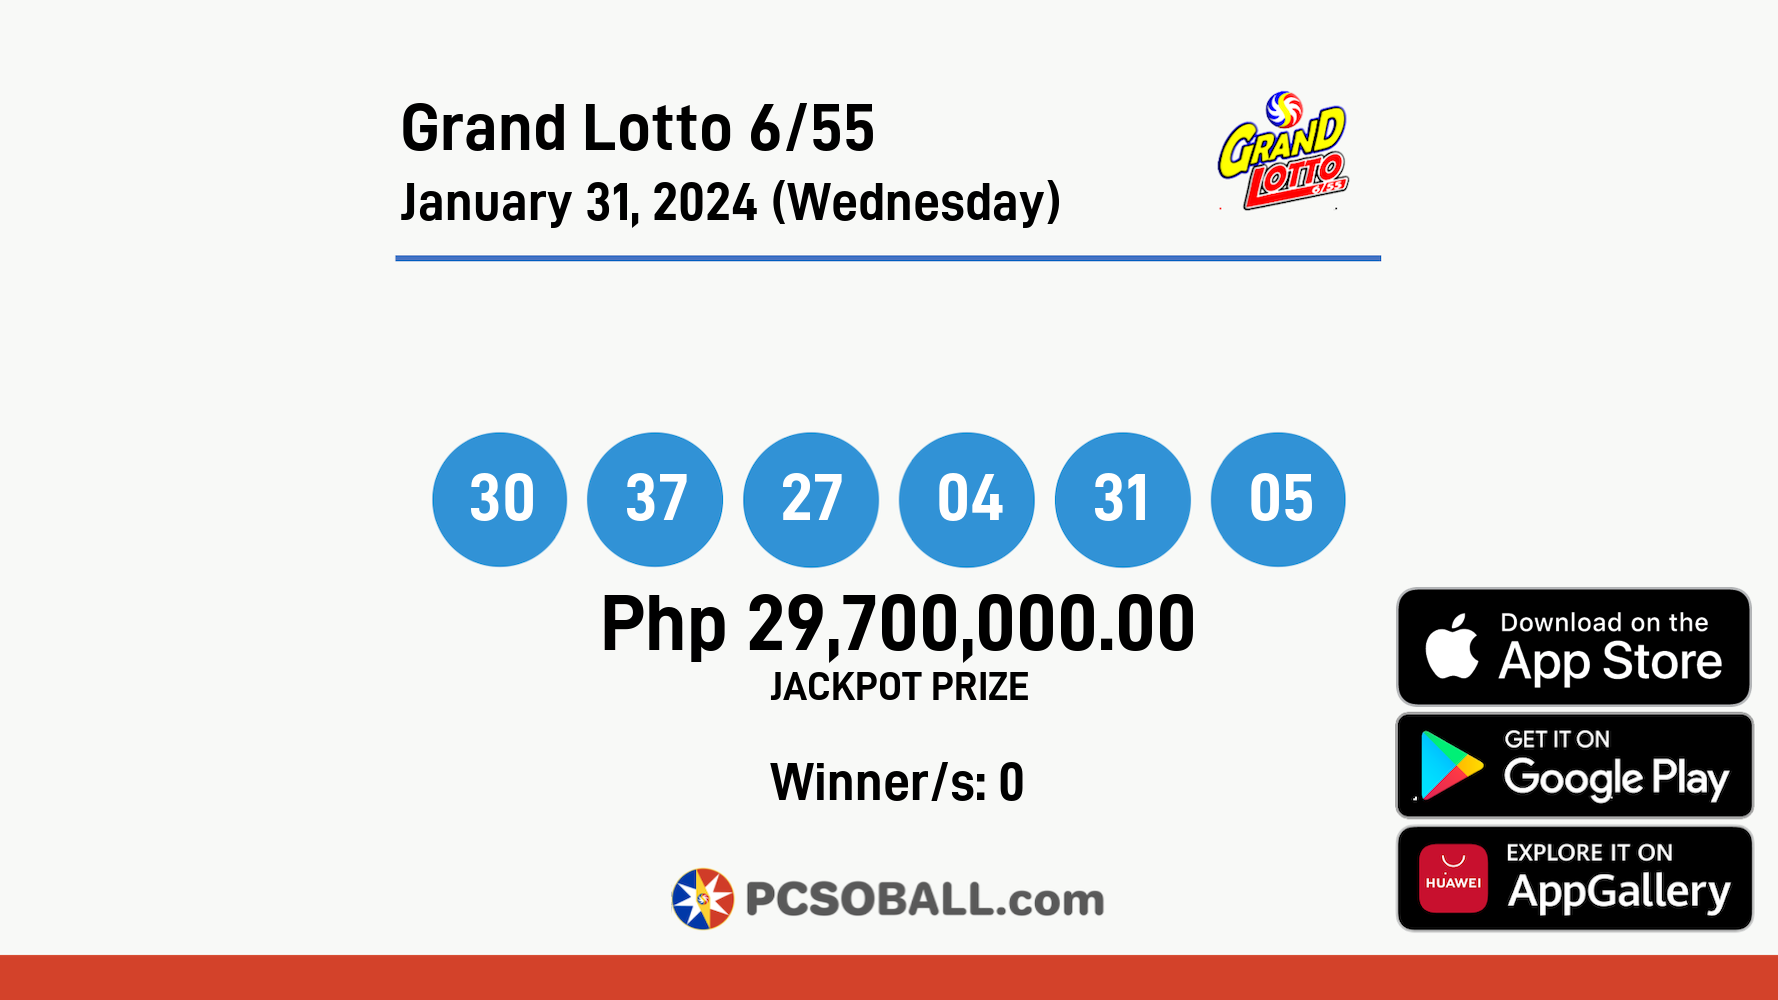 Grand Lotto 6/55 January 31, 2024 (Wednesday) Result